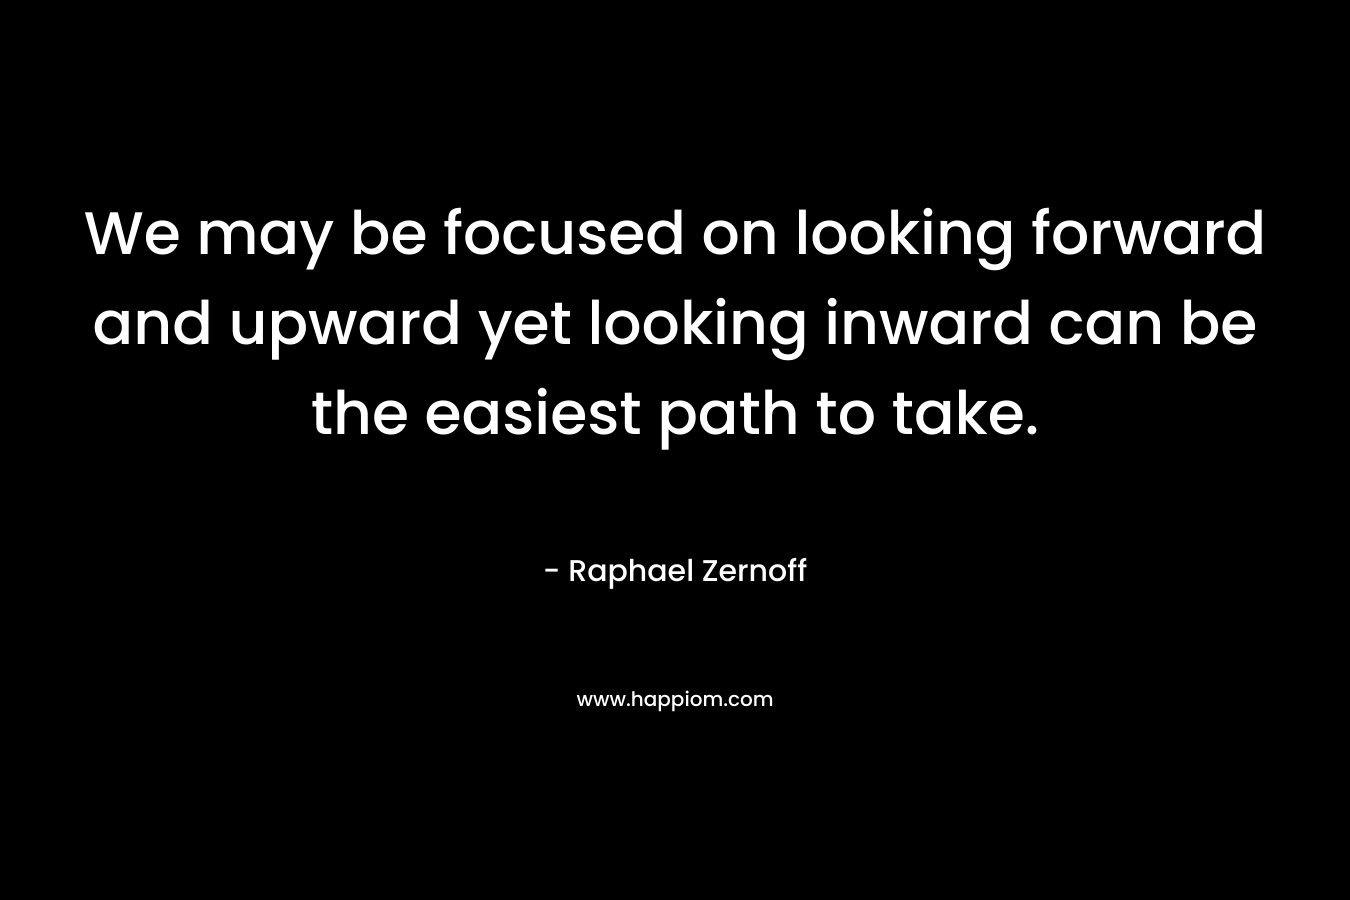 We may be focused on looking forward and upward yet looking inward can be the easiest path to take.